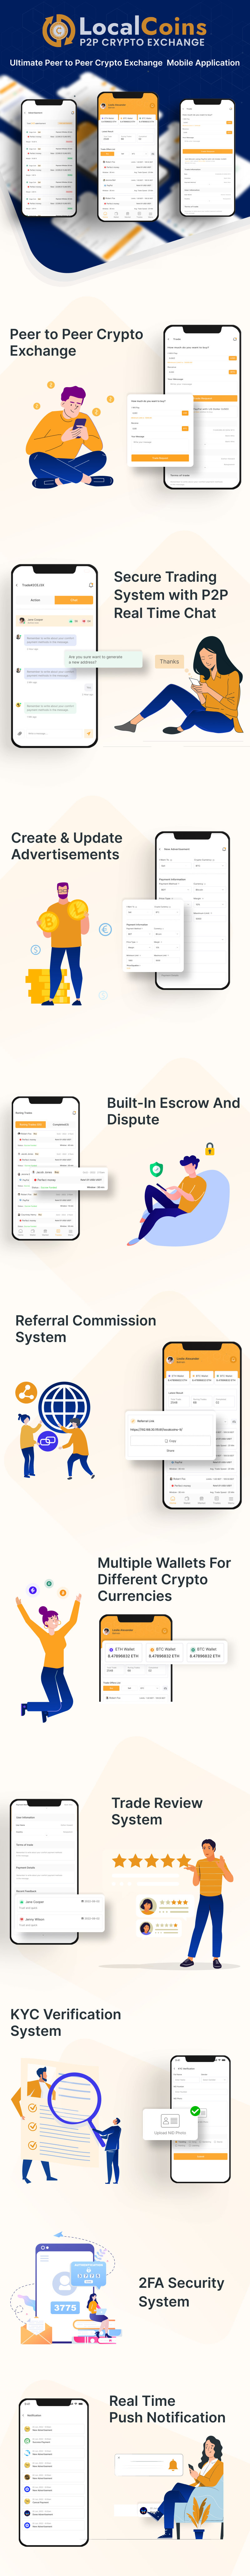 LocalCoins - Ultimate Peer To Peer Crypto Exchange Mobile Application - 2